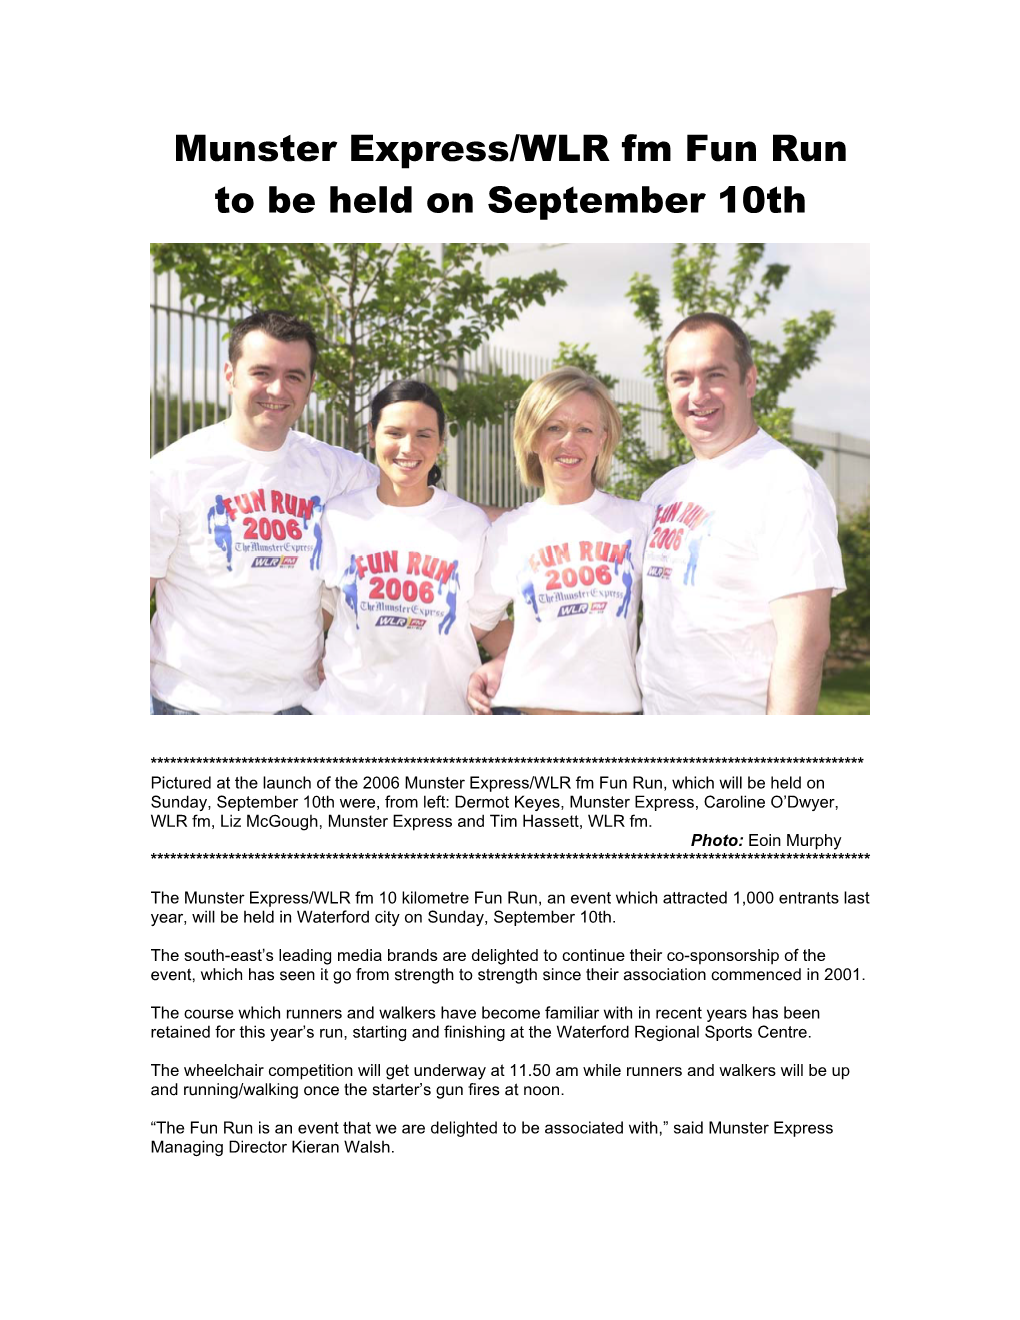 Munster Express/WLR Fm Fun Run to Be Held on September 10Th